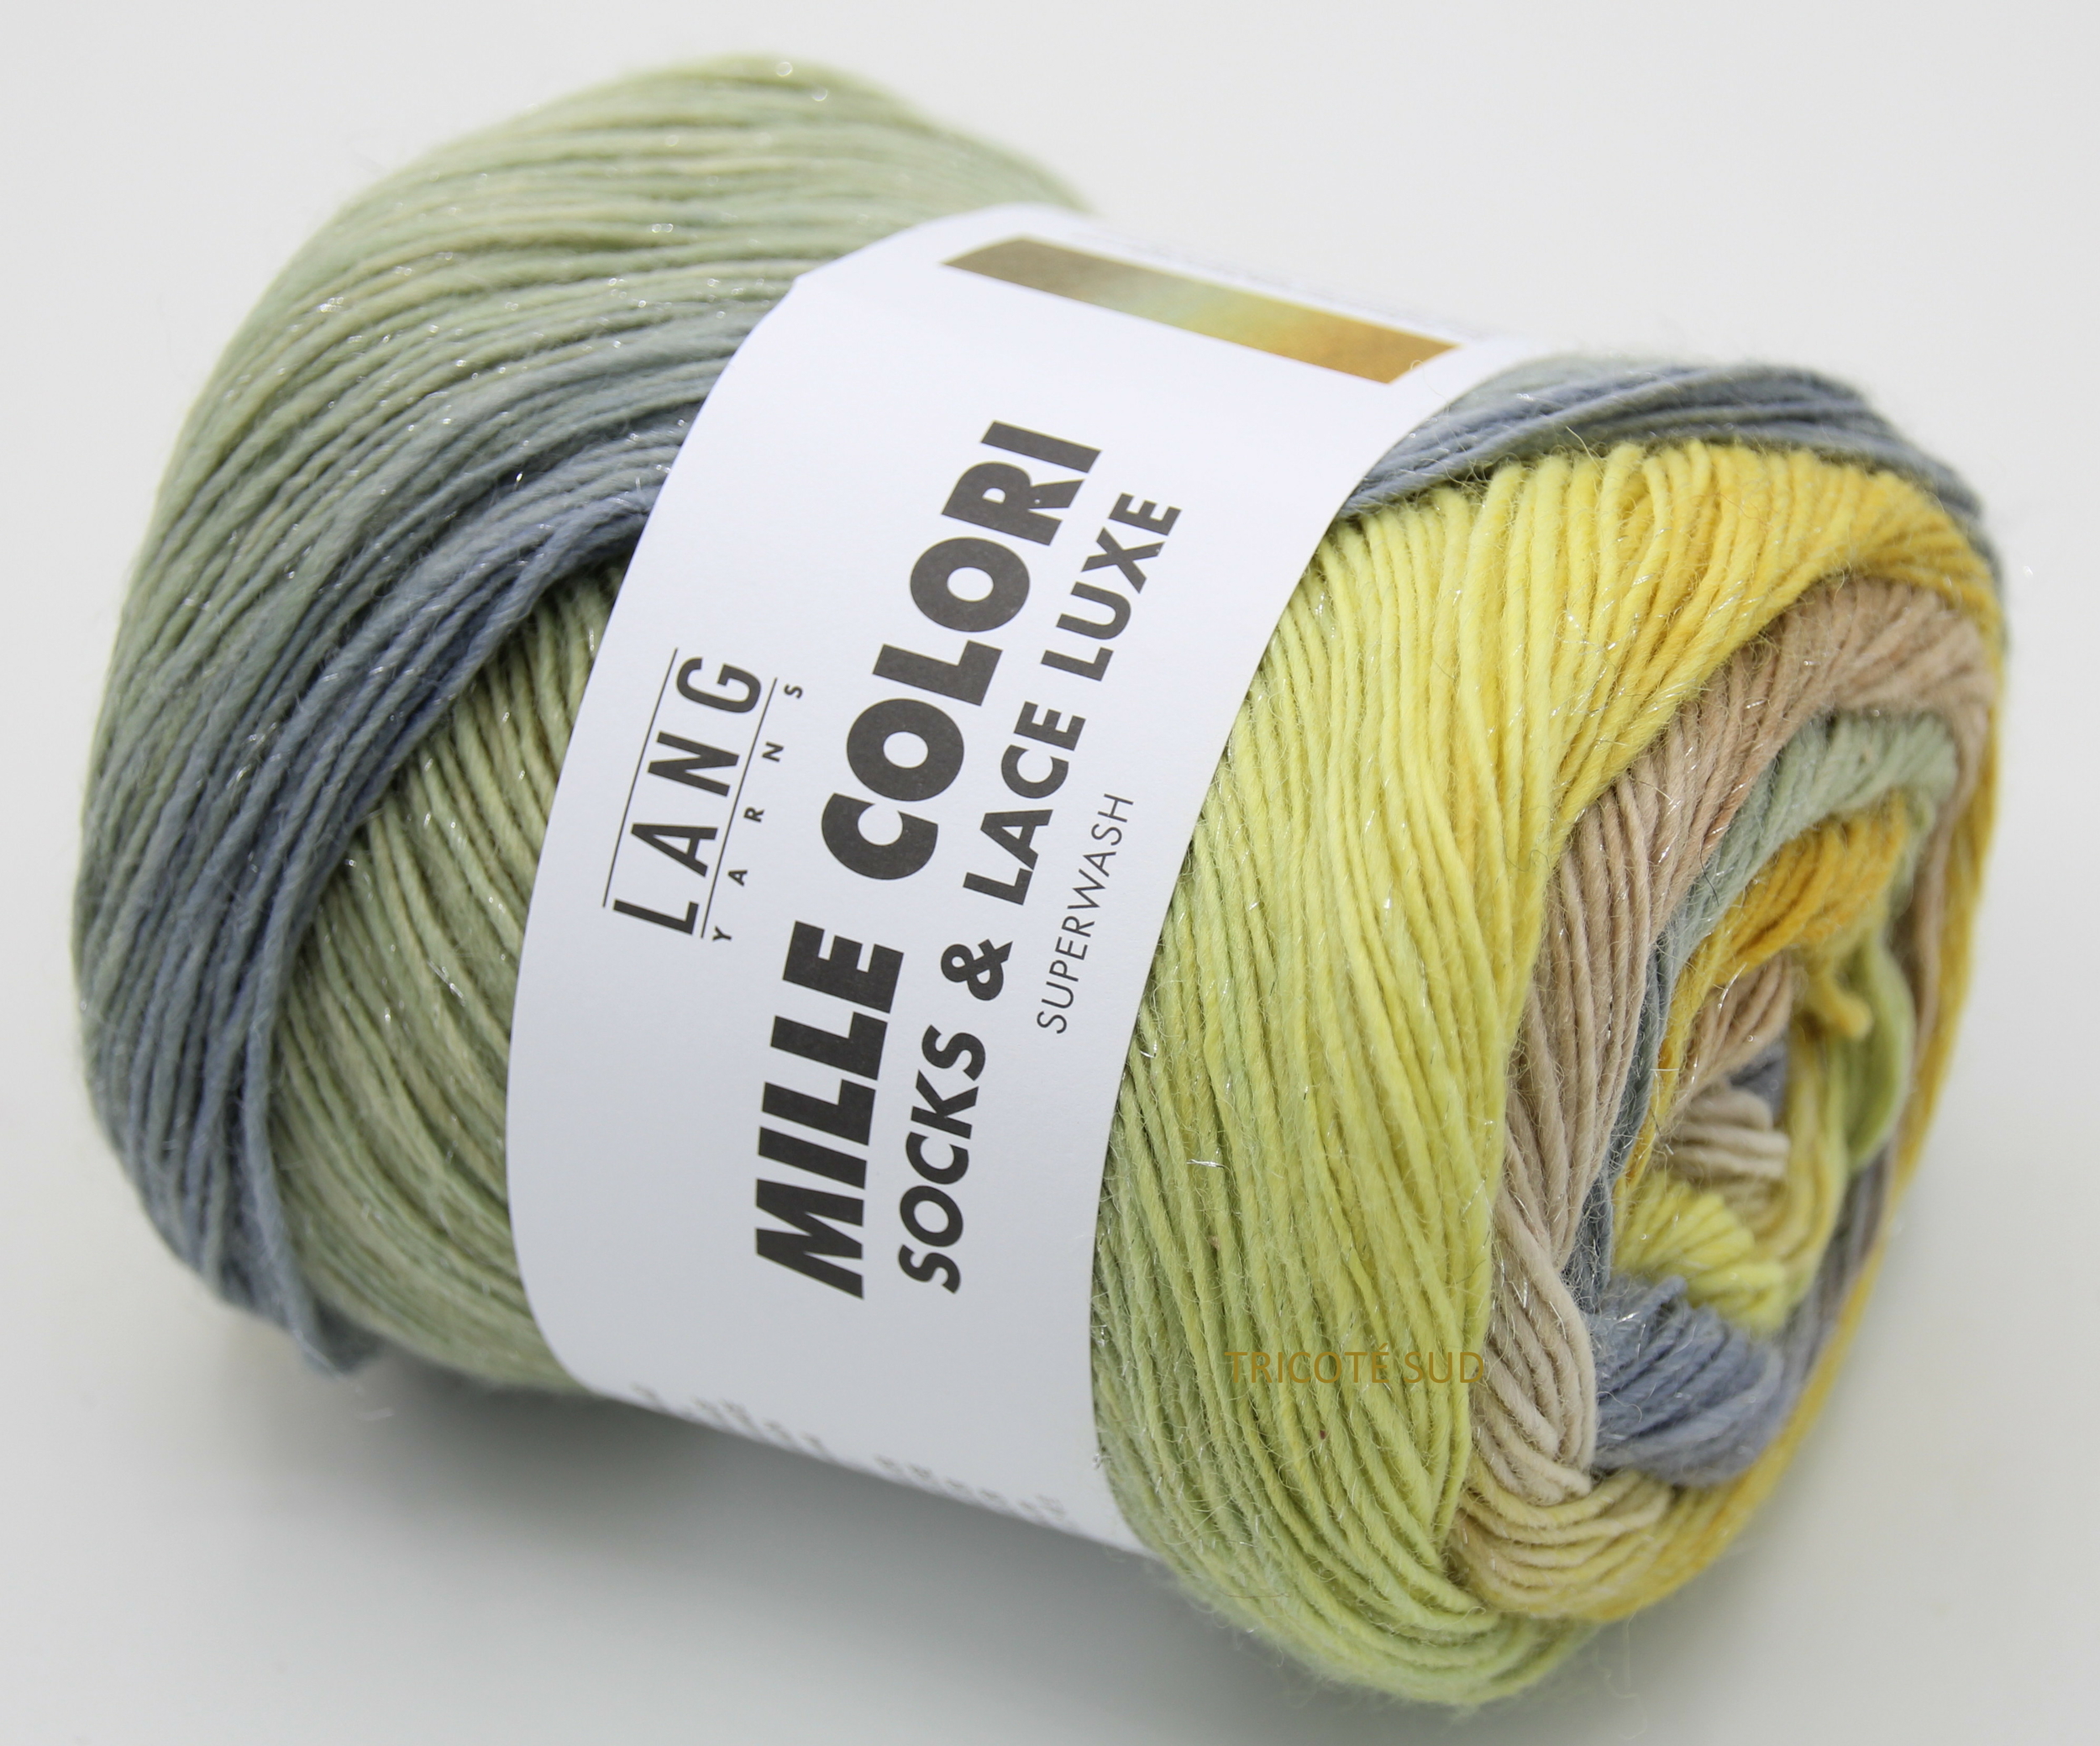 MILLE COLORI SOCKS AND LACE LUXE COLORIS 216 (2)